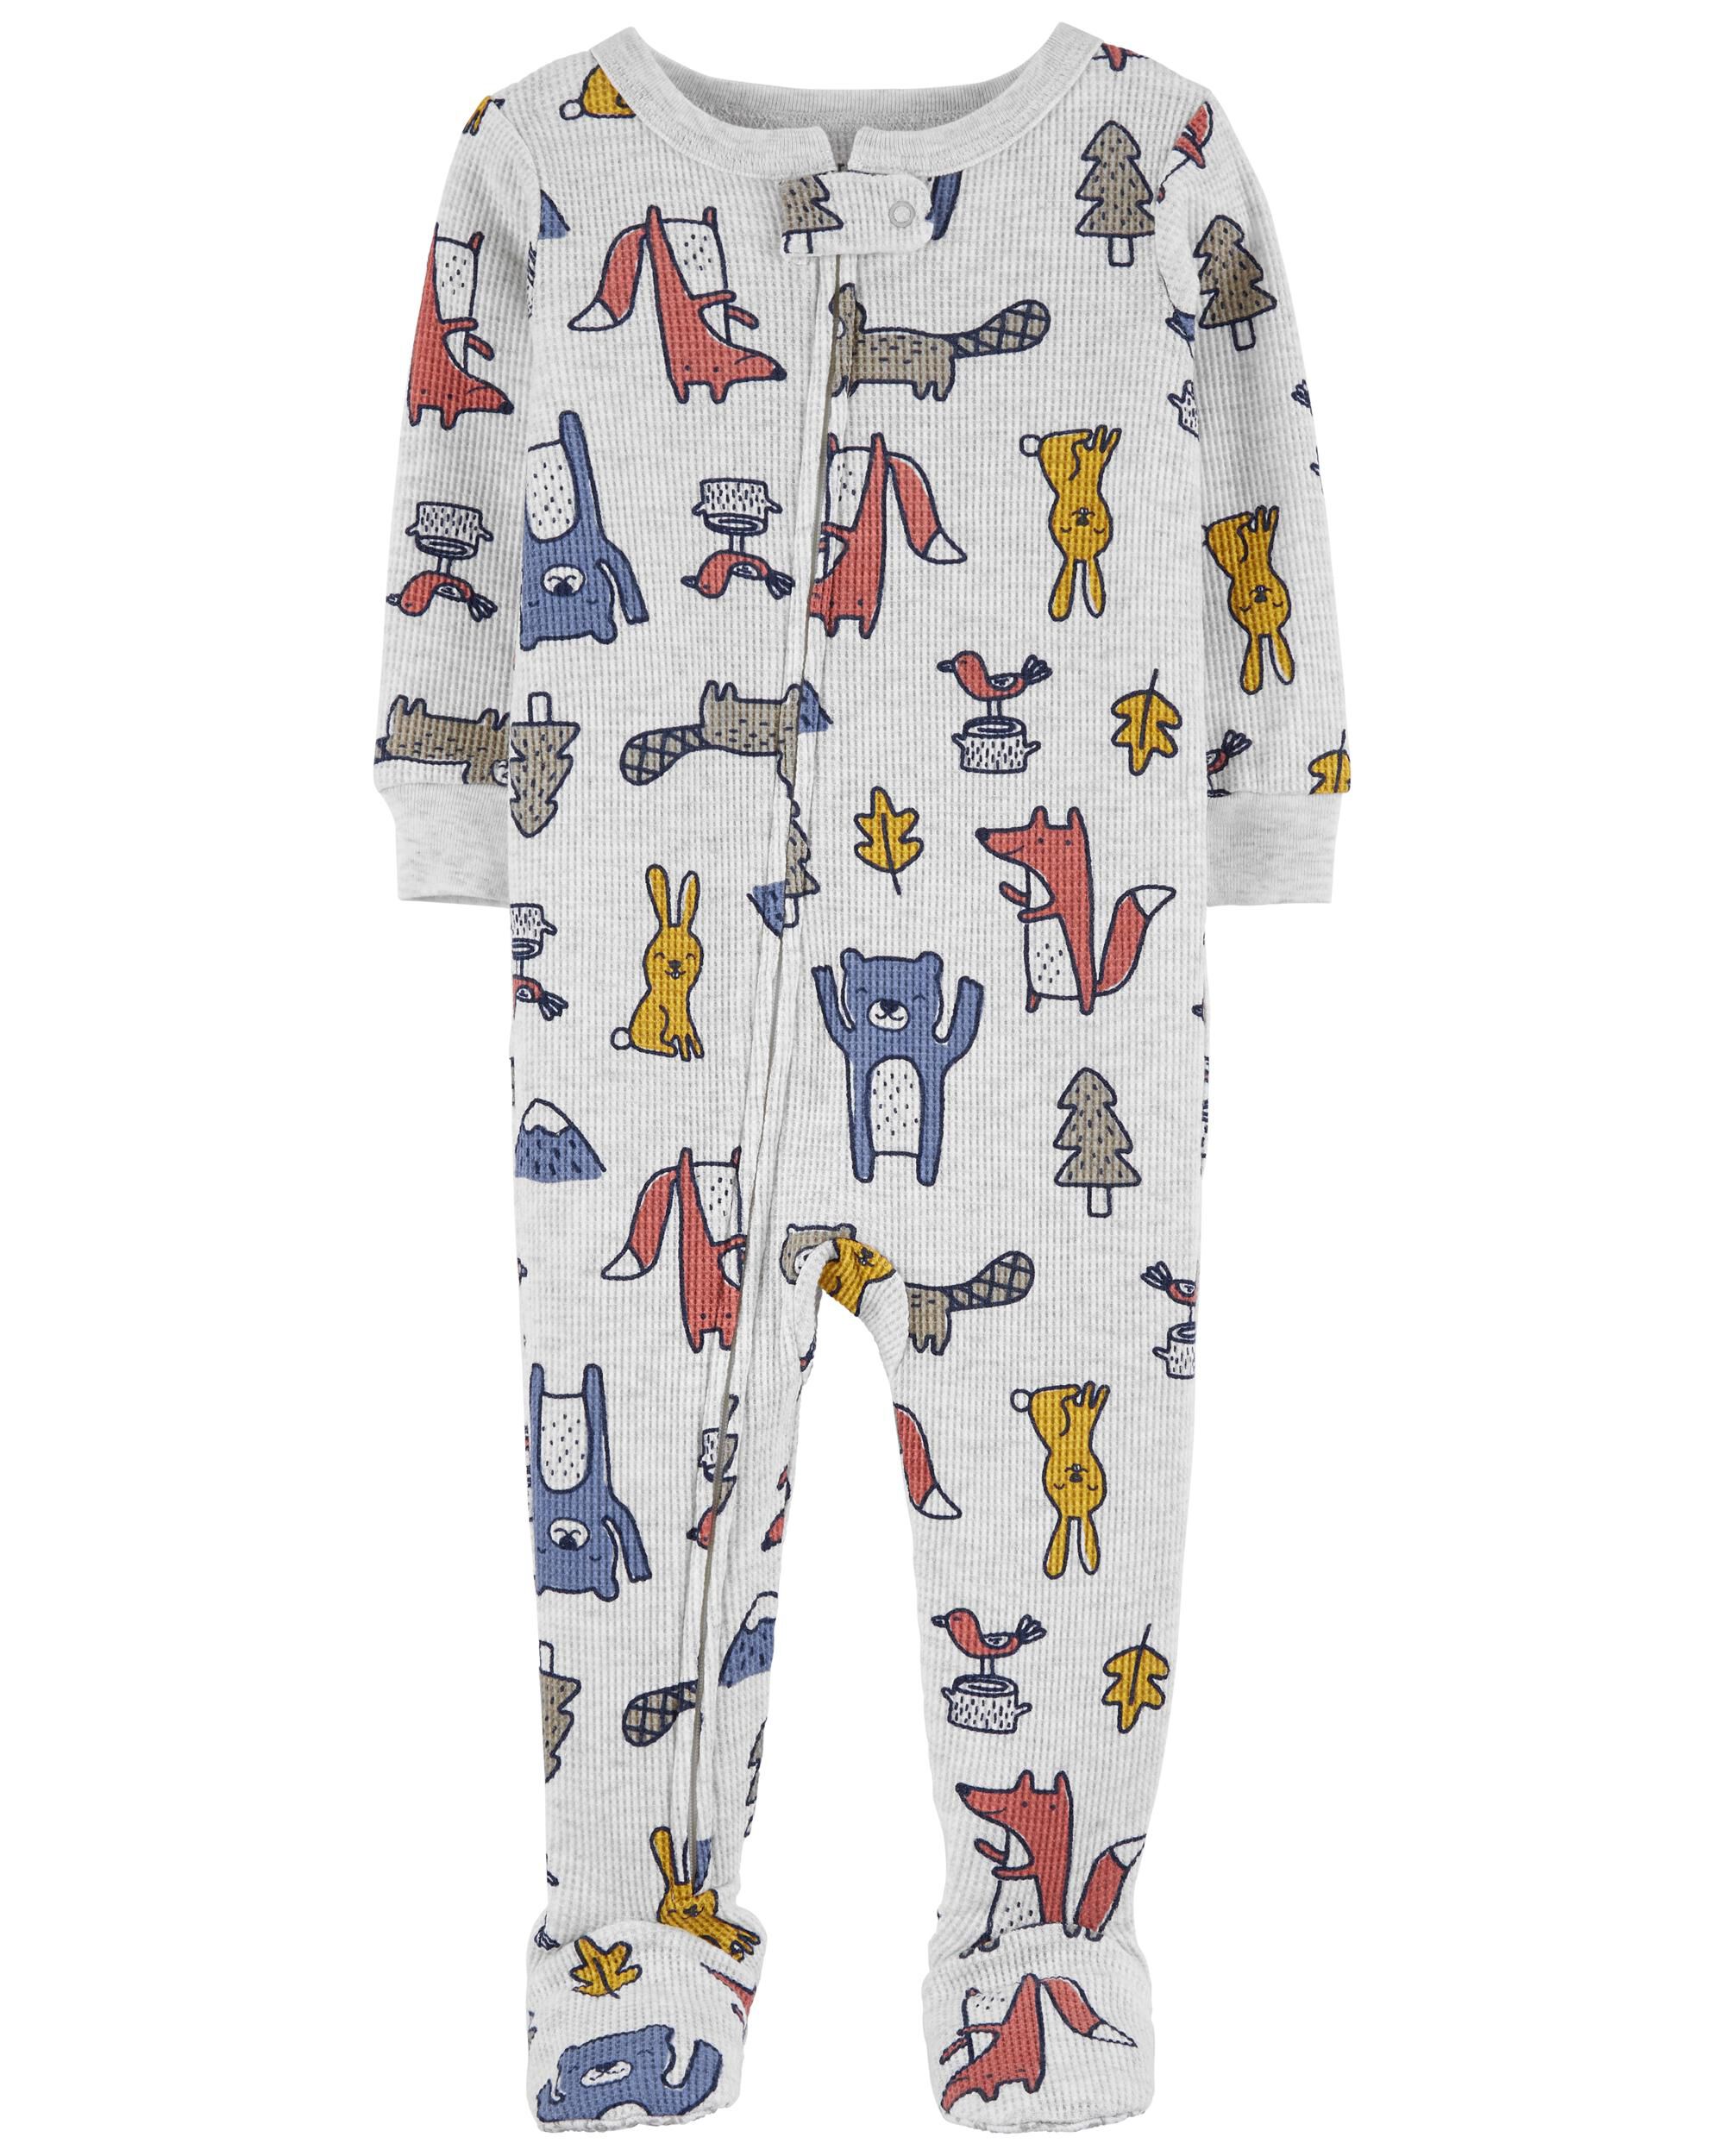 Carters Baby Boys 1 Piece Cotton Footed Sleepers